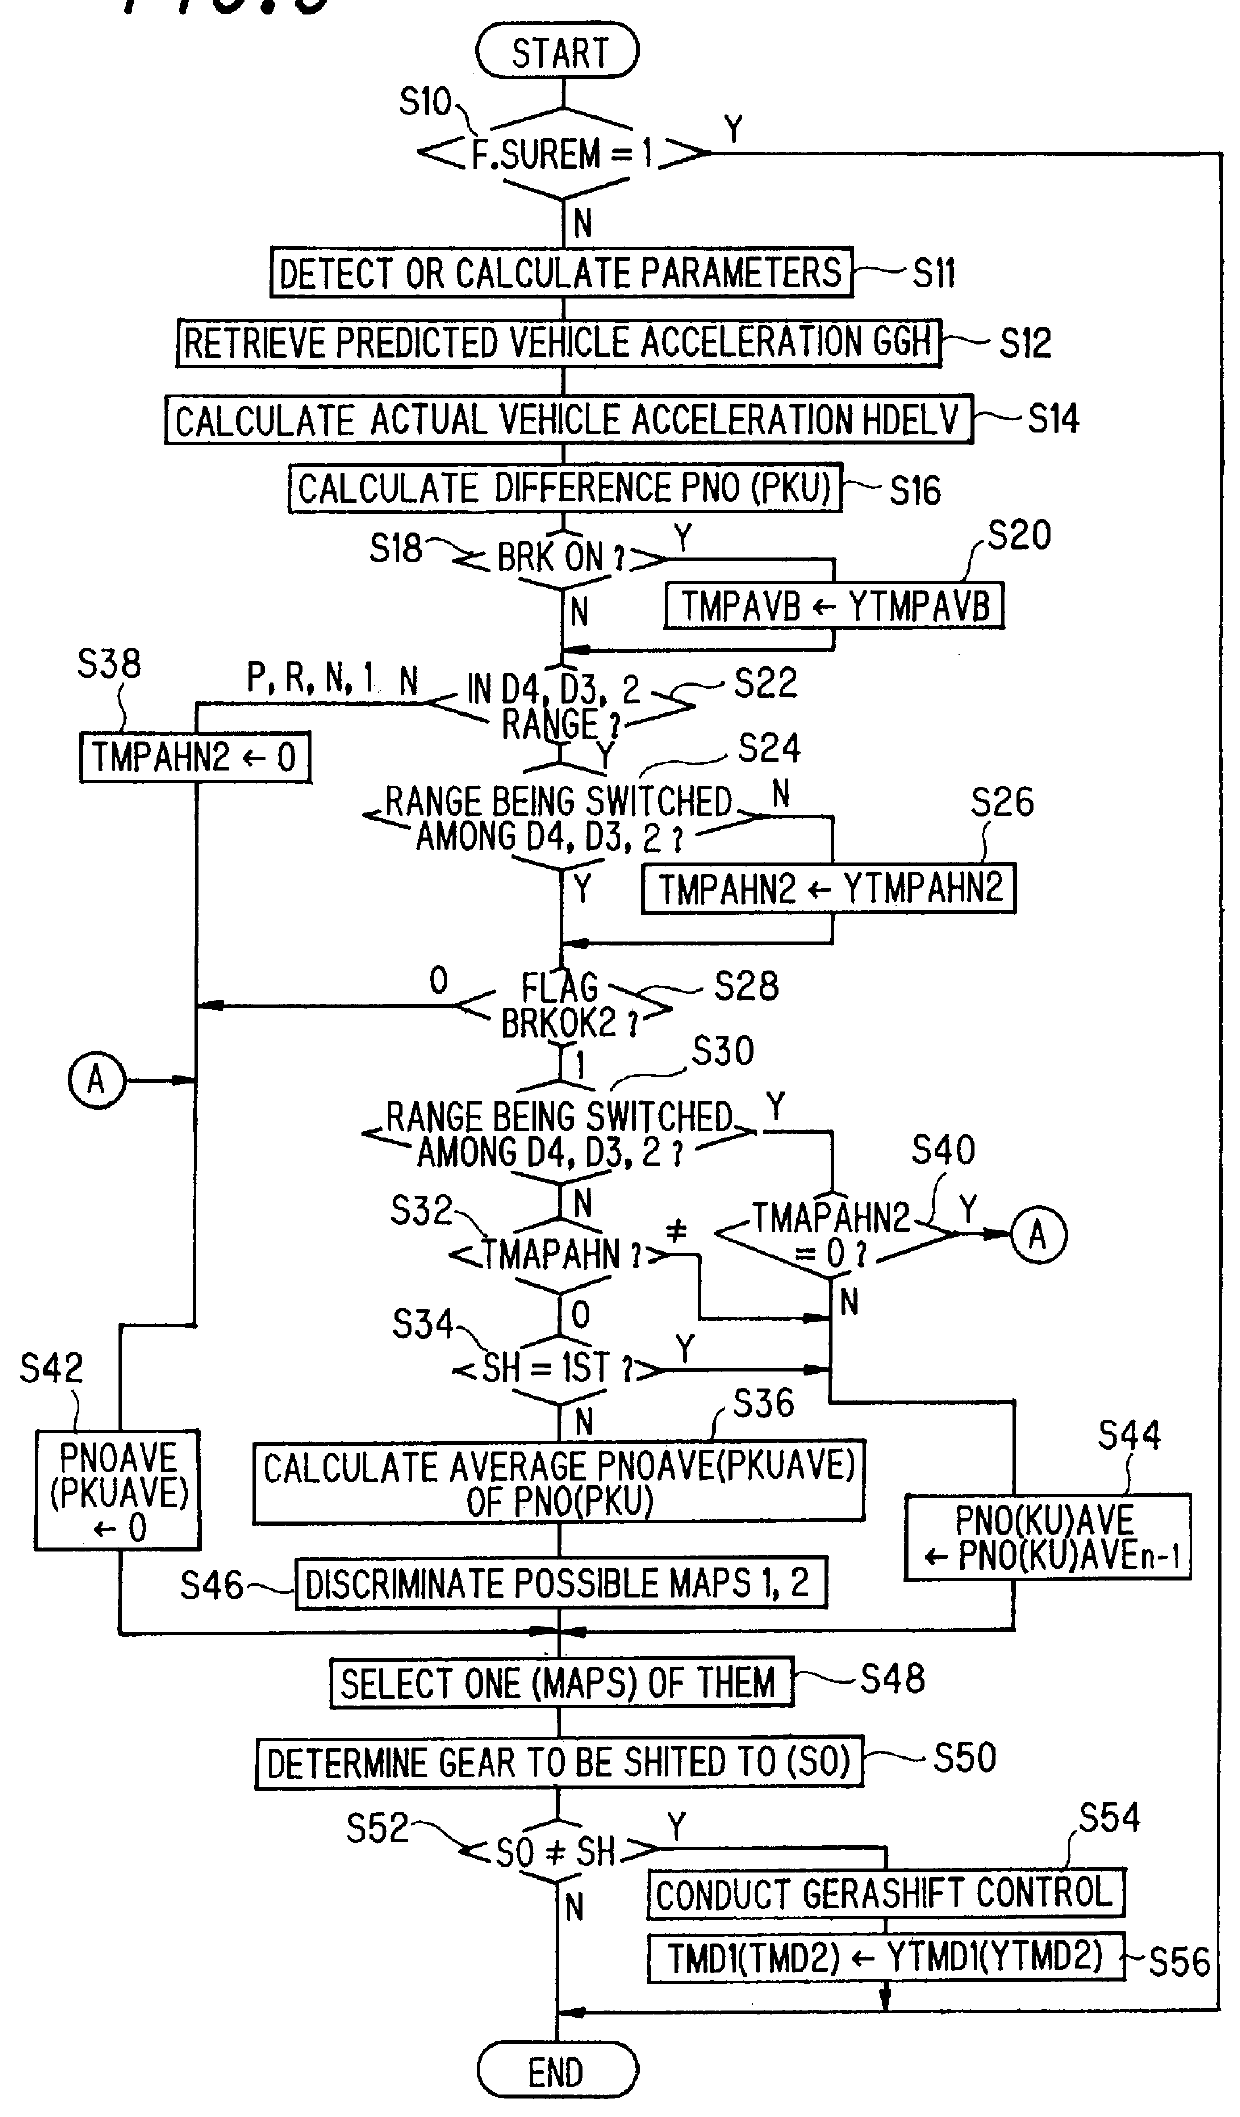 Control system for automatic vehicle transmission